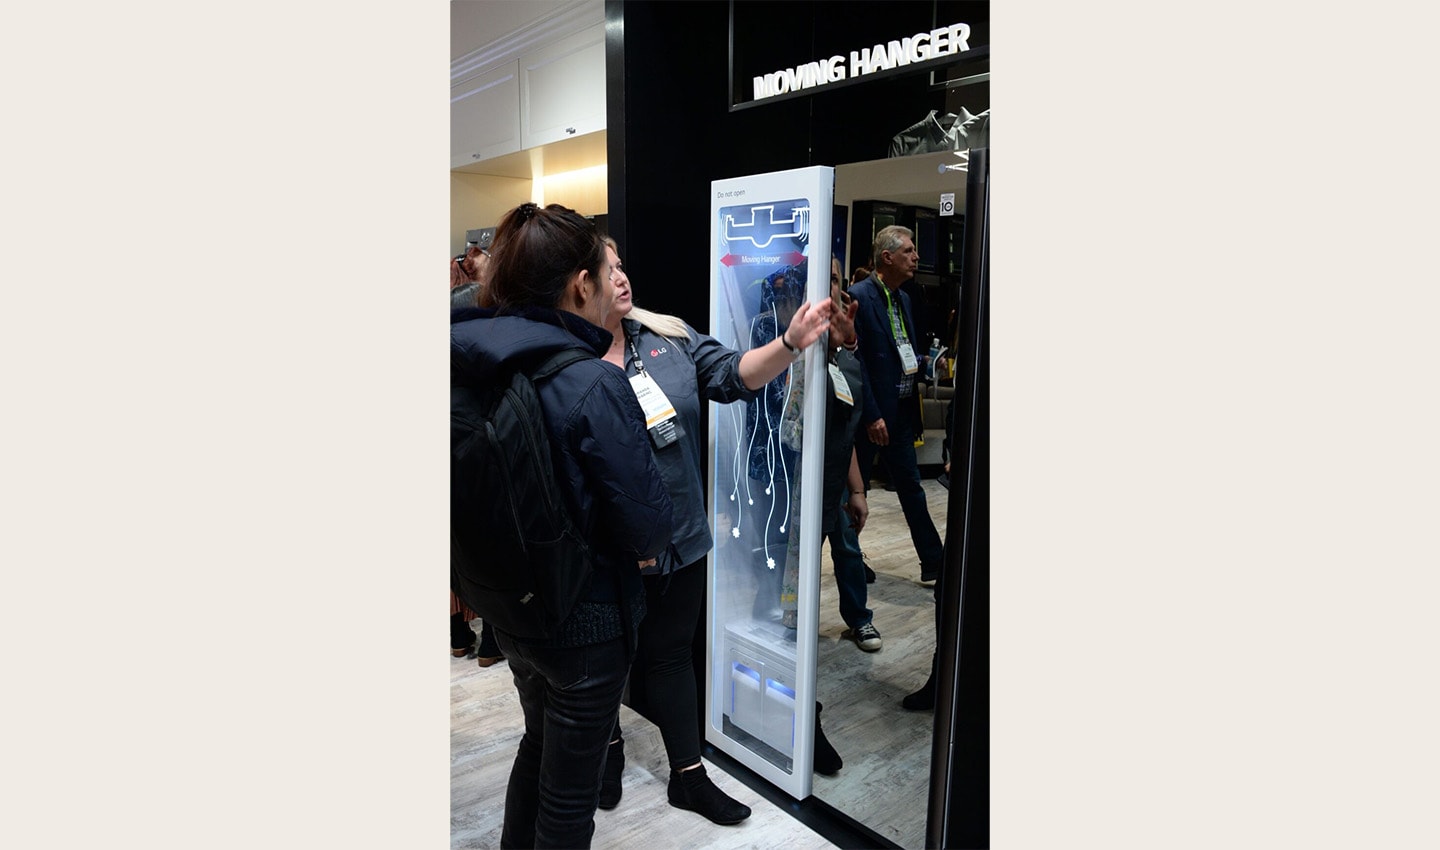 Two women look at and try out a display of LG’s Moving Hanger technology at the LG Styler display zone.